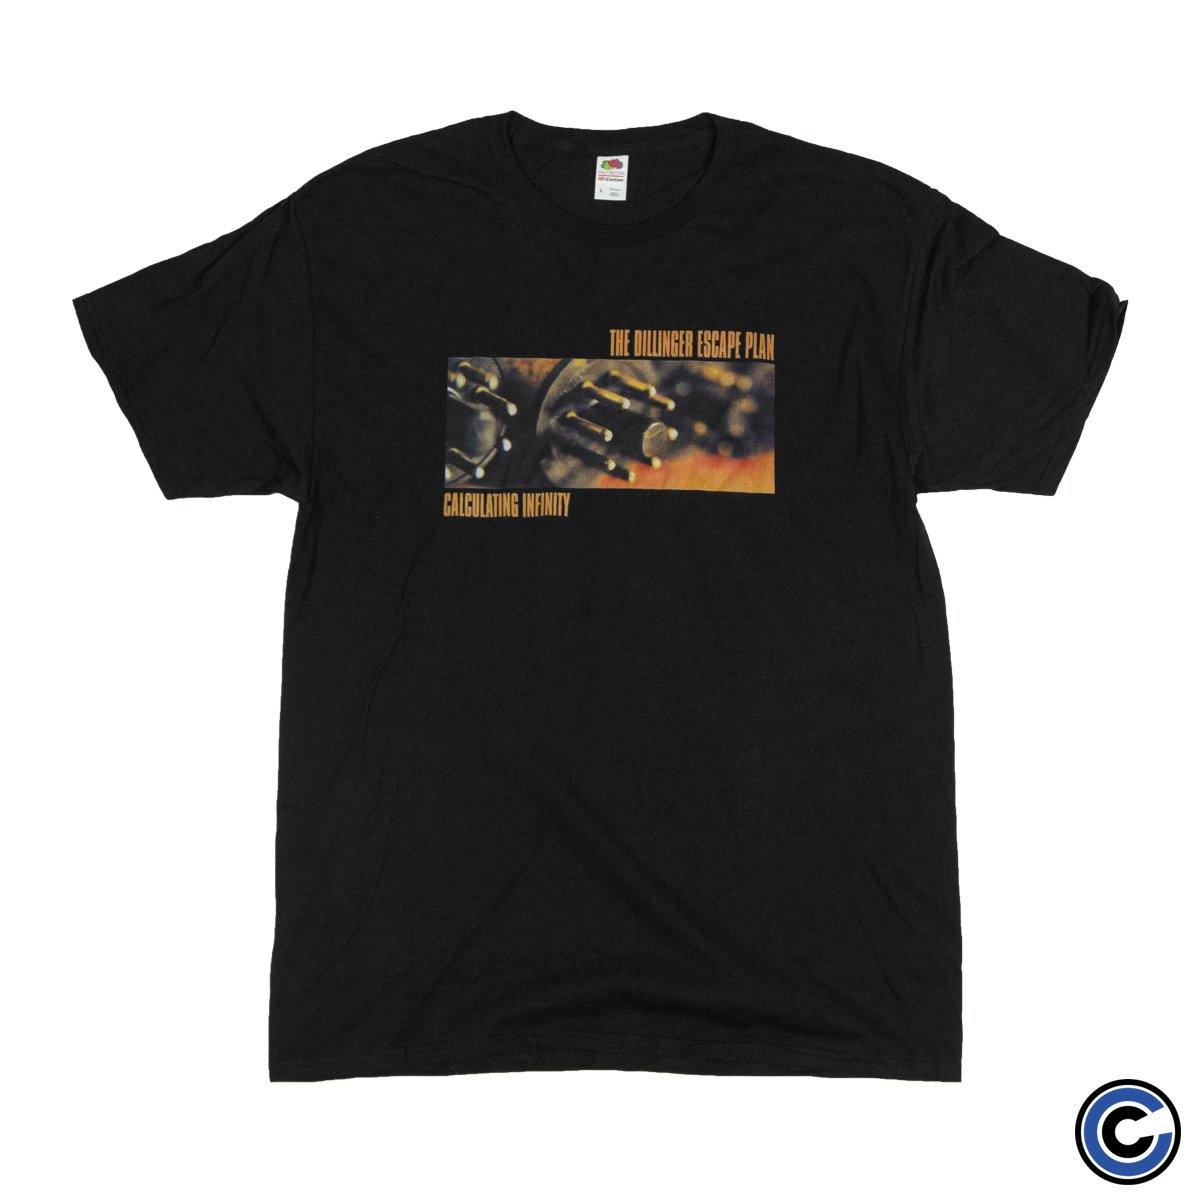 Buy – The Dillinger Escape Plan "Calculating Infinity" Shirt – Band & Music Merch – Cold Cuts Merch